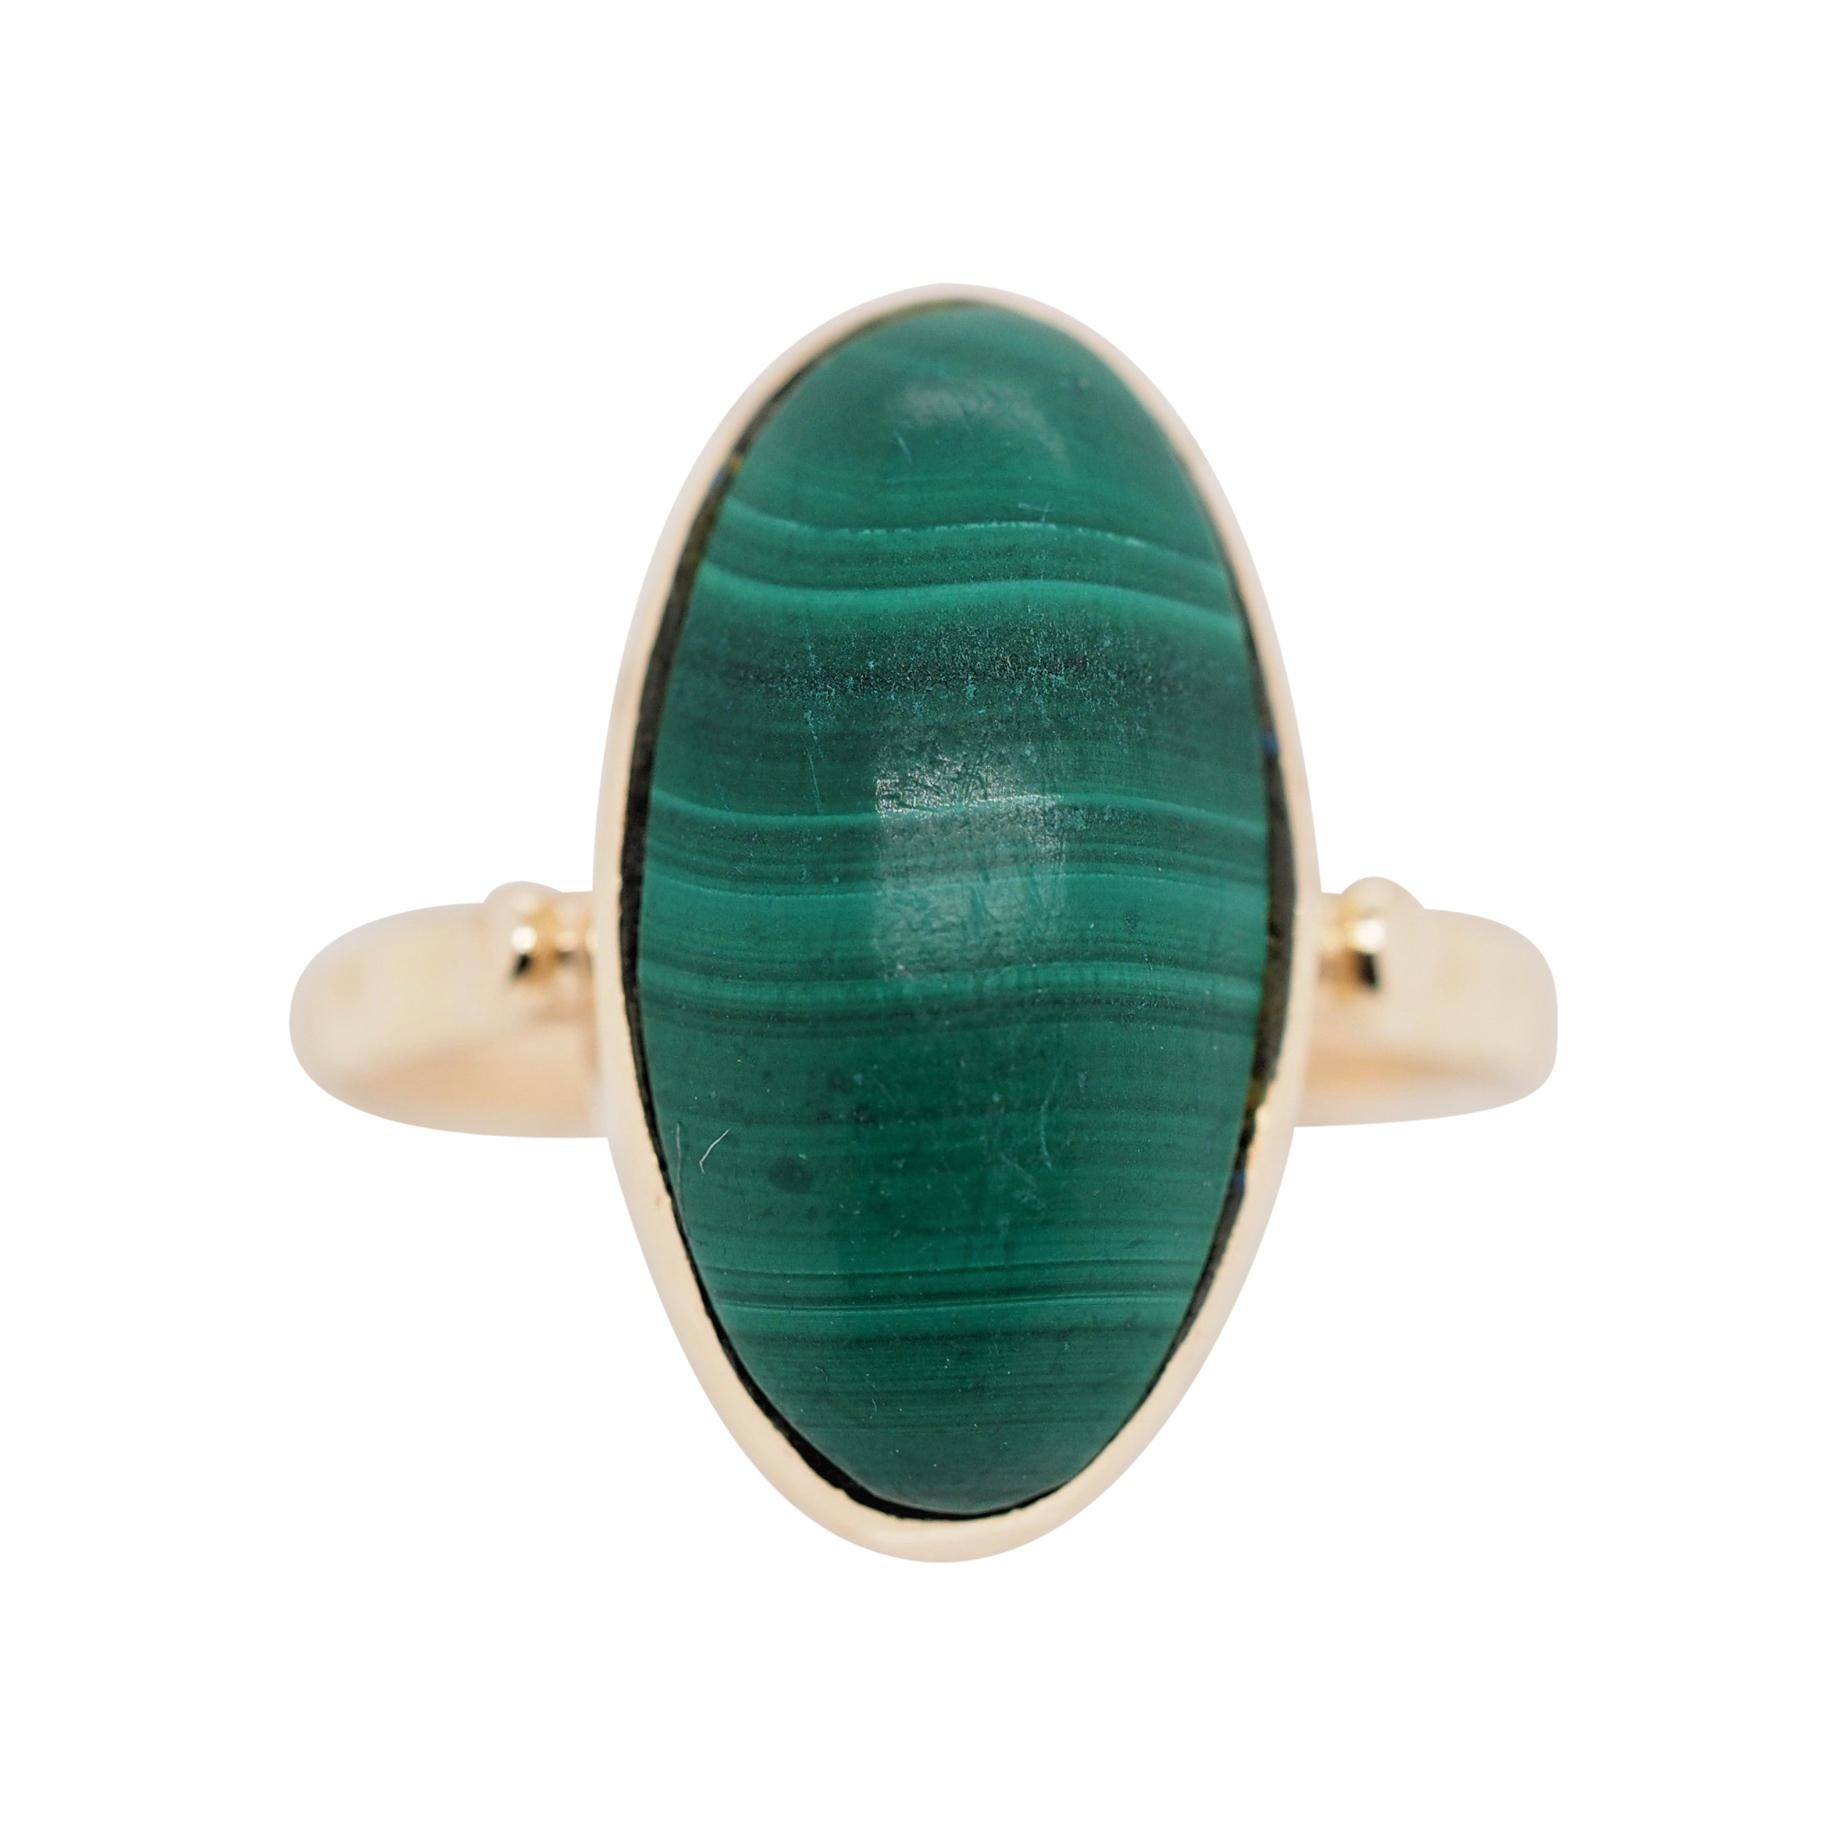 Vintage 14 Karat Gold with Marquise Cut Malachite Solitaire Ring